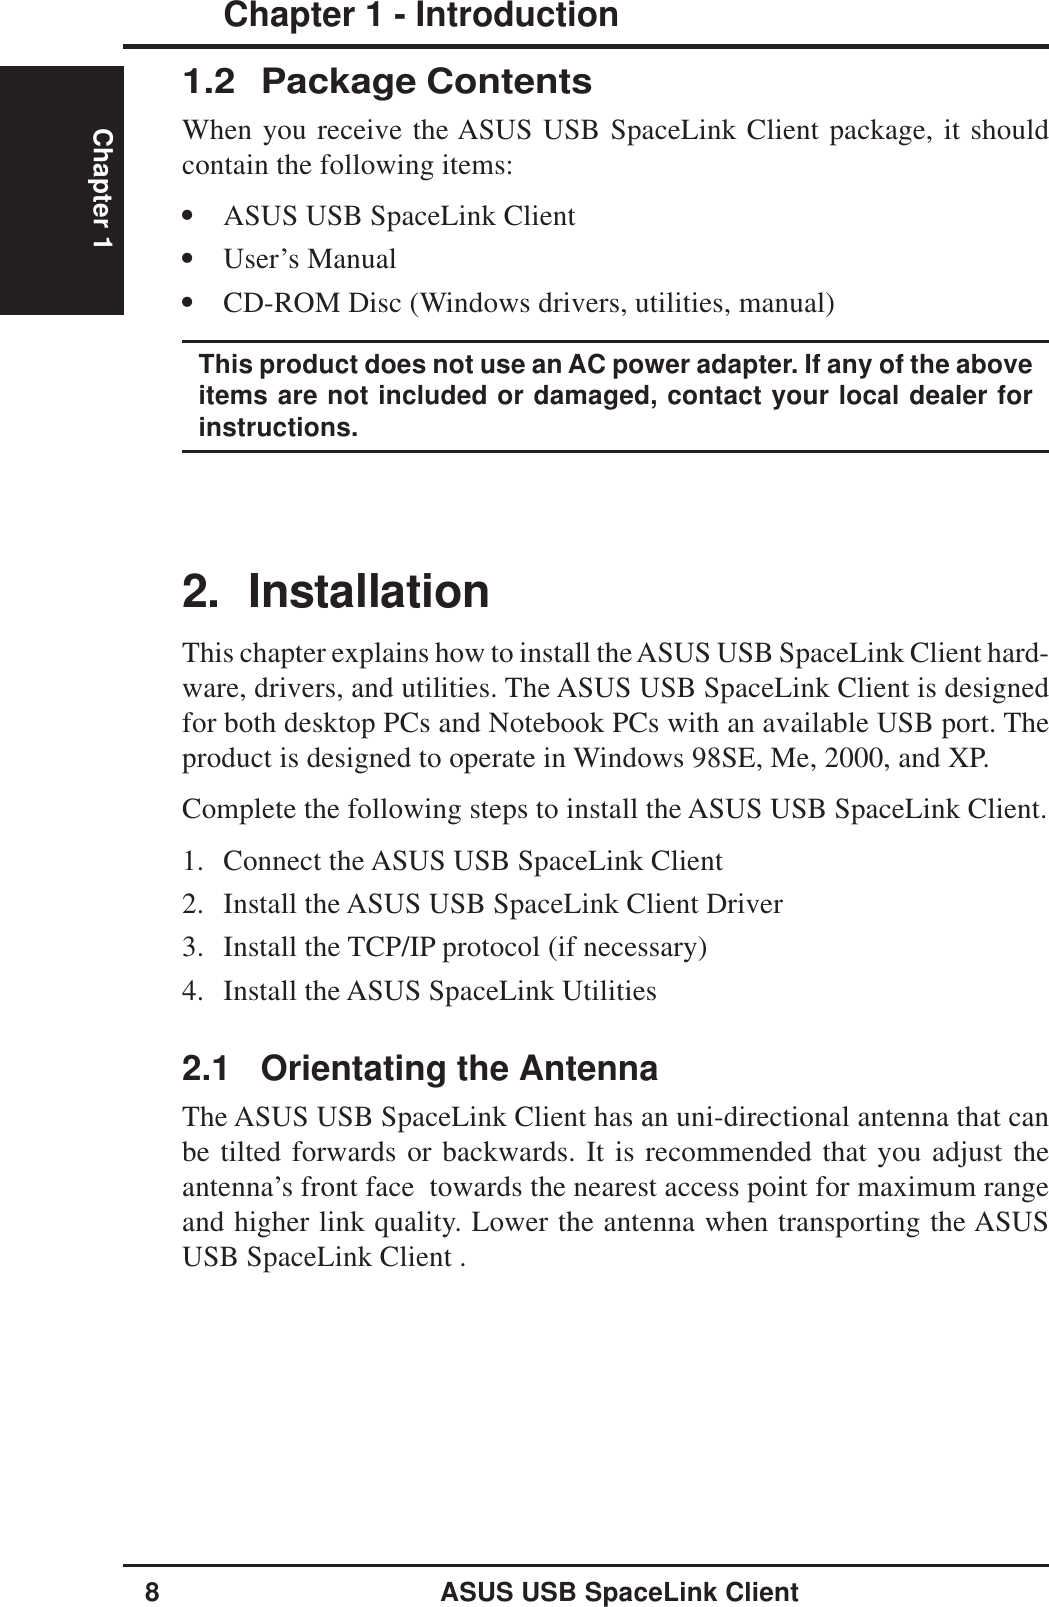 8ASUS USB SpaceLink ClientChapter 1 - IntroductionChapter 12. InstallationThis chapter explains how to install the ASUS USB SpaceLink Client hard-ware, drivers, and utilities. The ASUS USB SpaceLink Client is designedfor both desktop PCs and Notebook PCs with an available USB port. Theproduct is designed to operate in Windows 98SE, Me, 2000, and XP.Complete the following steps to install the ASUS USB SpaceLink Client.1. Connect the ASUS USB SpaceLink Client2. Install the ASUS USB SpaceLink Client Driver3. Install the TCP/IP protocol (if necessary)4. Install the ASUS SpaceLink Utilities2.1 Orientating the AntennaThe ASUS USB SpaceLink Client has an uni-directional antenna that canbe tilted forwards or backwards. It is recommended that you adjust theantenna’s front face  towards the nearest access point for maximum rangeand higher link quality. Lower the antenna when transporting the ASUSUSB SpaceLink Client .1.2 Package ContentsWhen you receive the ASUS USB SpaceLink Client package, it shouldcontain the following items:•ASUS USB SpaceLink Client•User’s Manual•CD-ROM Disc (Windows drivers, utilities, manual)This product does not use an AC power adapter. If any of the aboveitems are not included or damaged, contact your local dealer forinstructions.